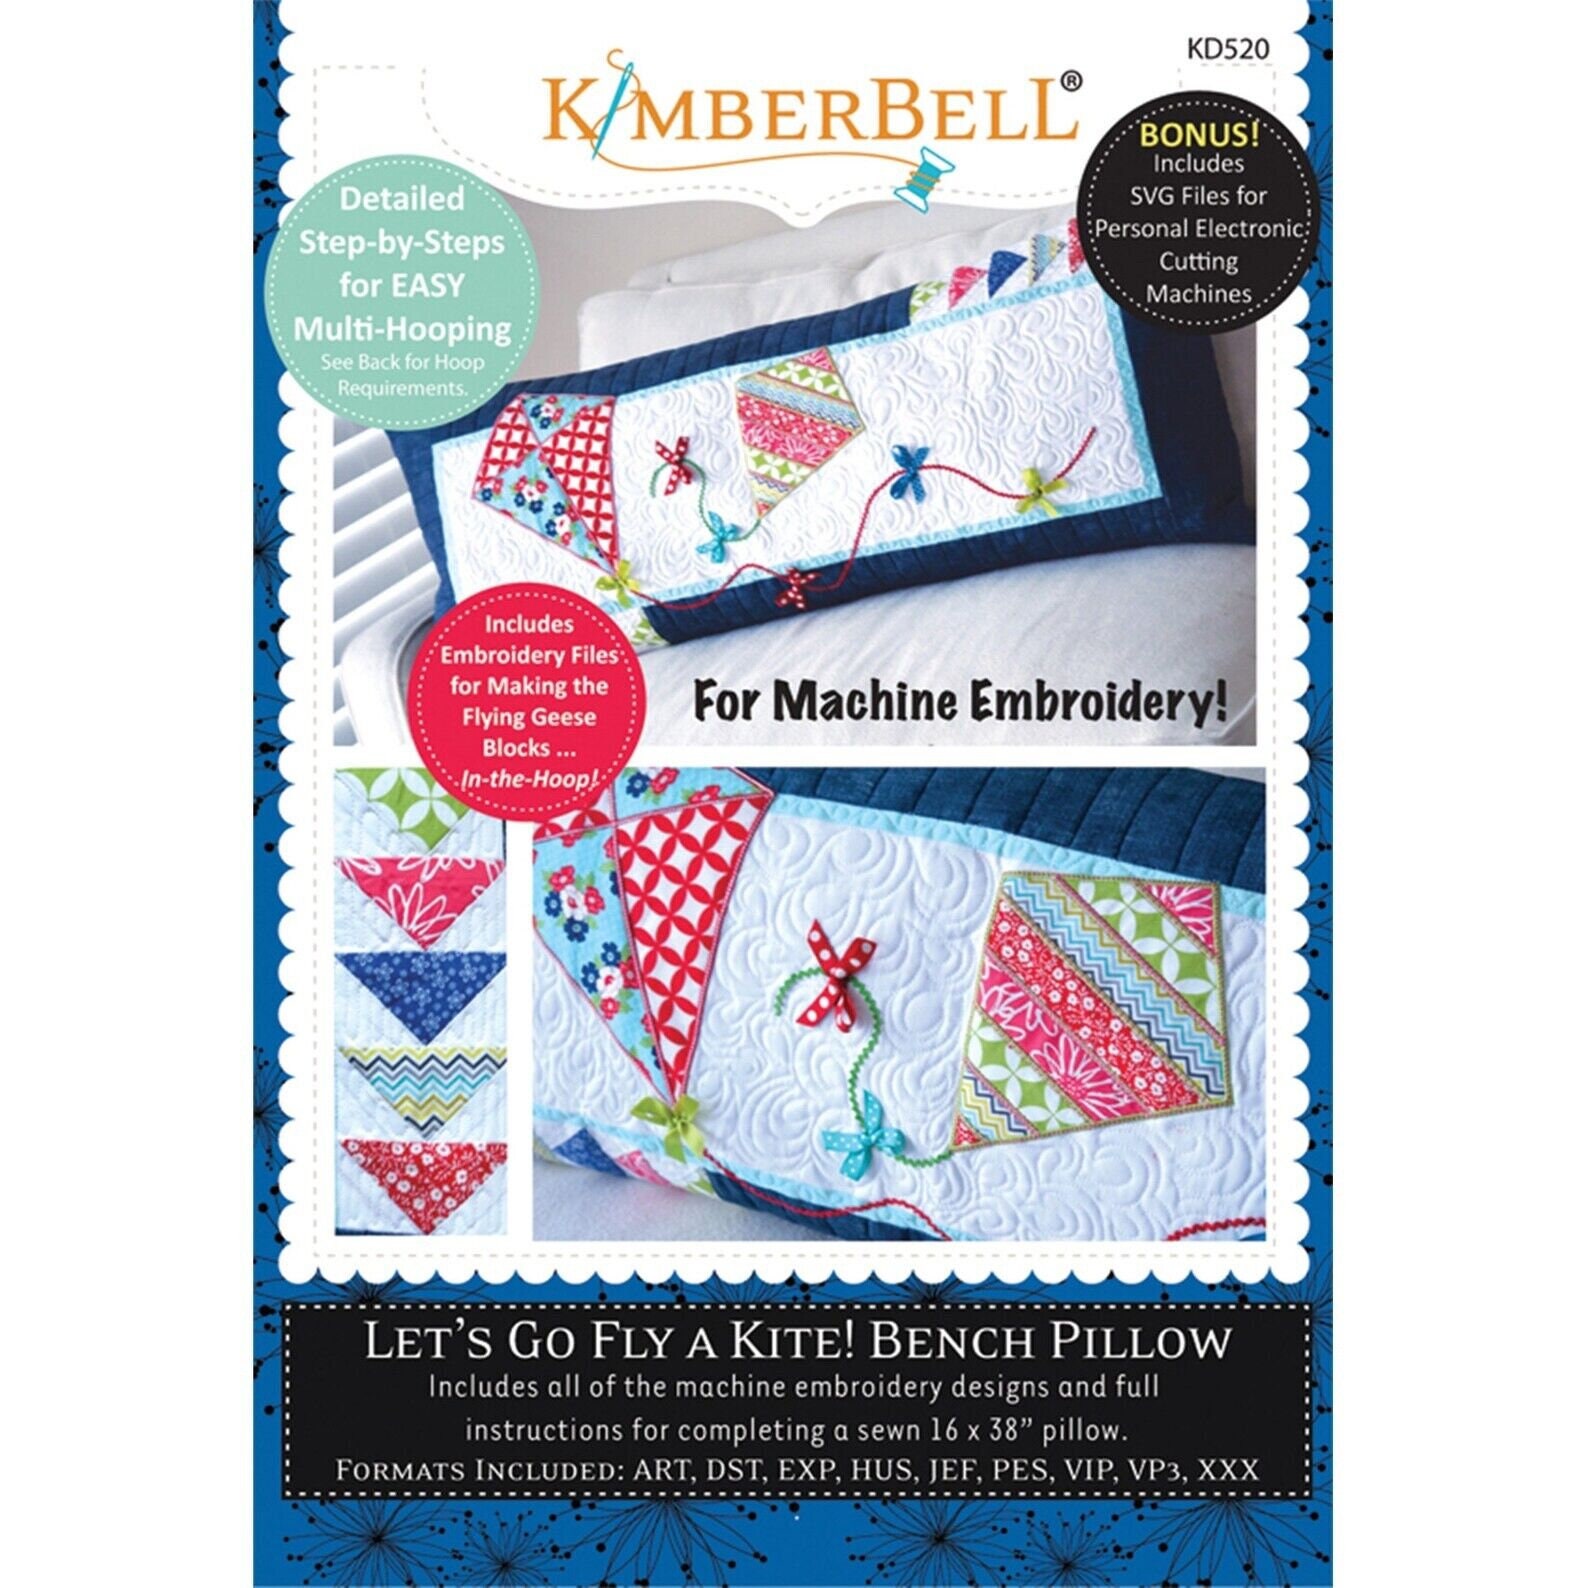 Kimberbell Home for The Holidays: 8 Curated Machine Embroidery Design  Projects on USB, Step-by-Step Instructions for Beginner to Advanced,  Variety of